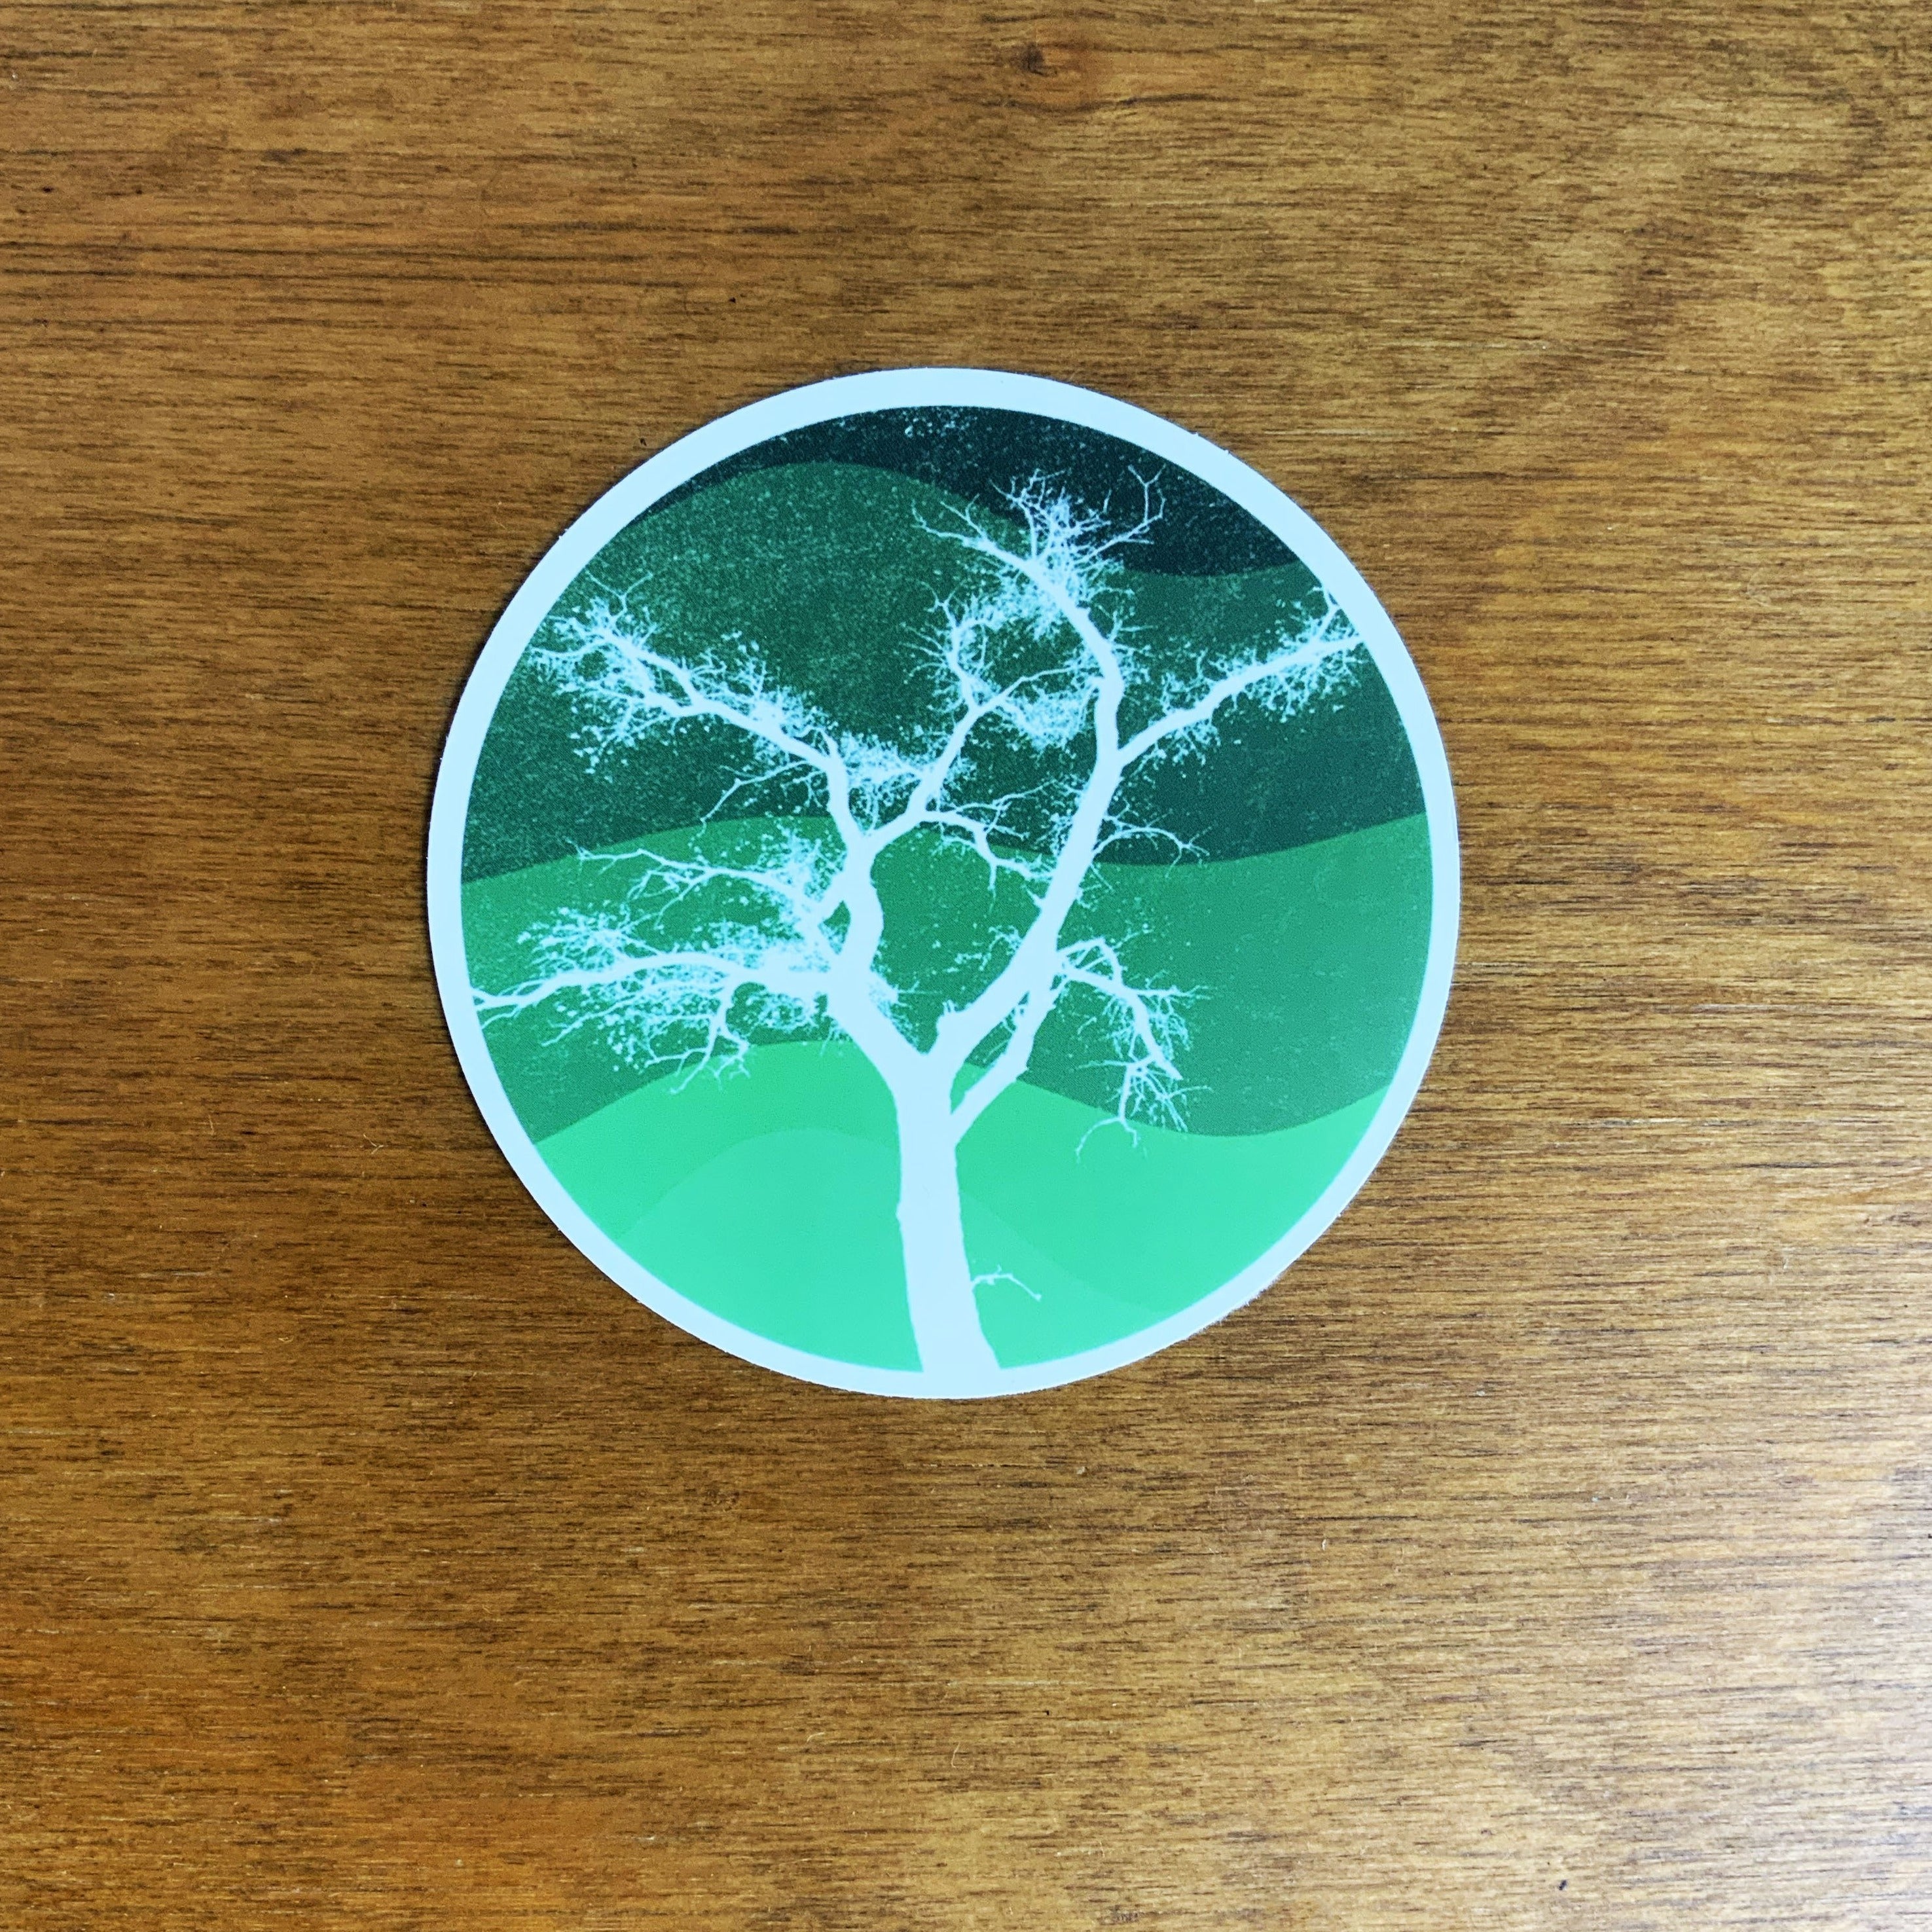 Electric Tree Sticker, sticker, Pacific Rayne, Defiance Outdoor Gear Co.